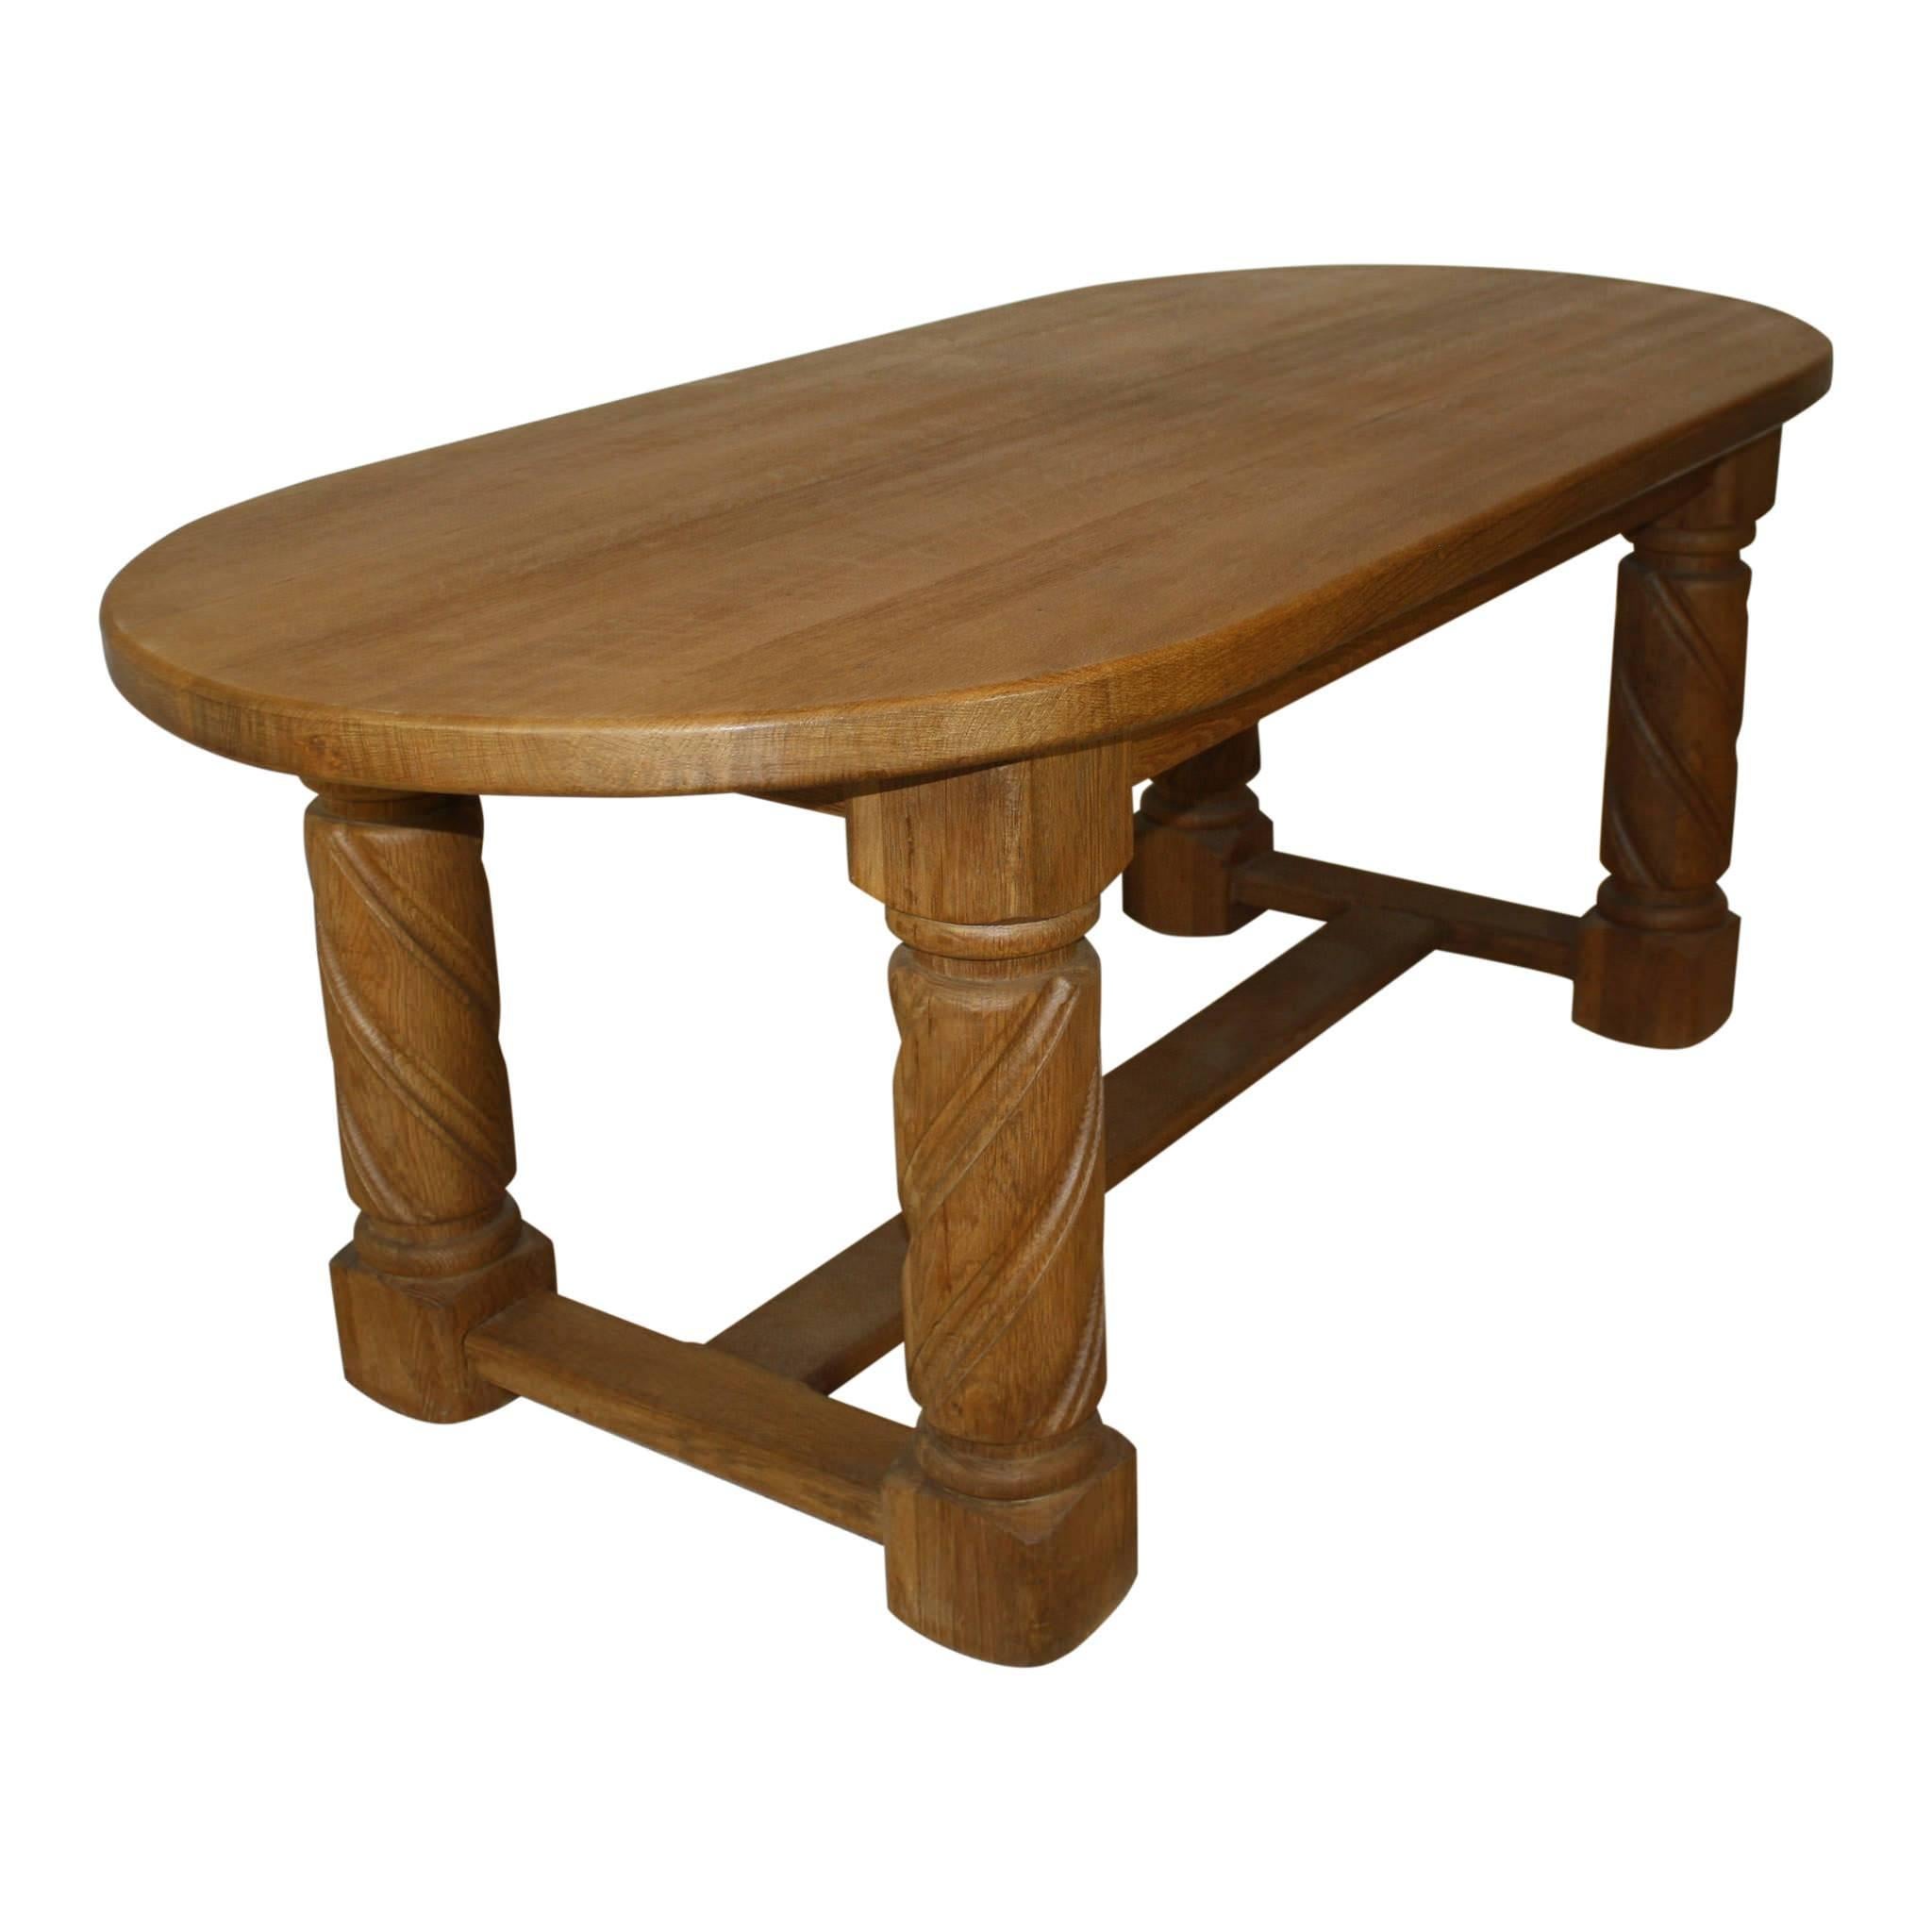 With a top generously crafted from two inch, quarter sawn oak, this table boasts of quality and stability. Large, spiral-fluted legs give solid support to the substantial top. The legs are united by stretchers.
 